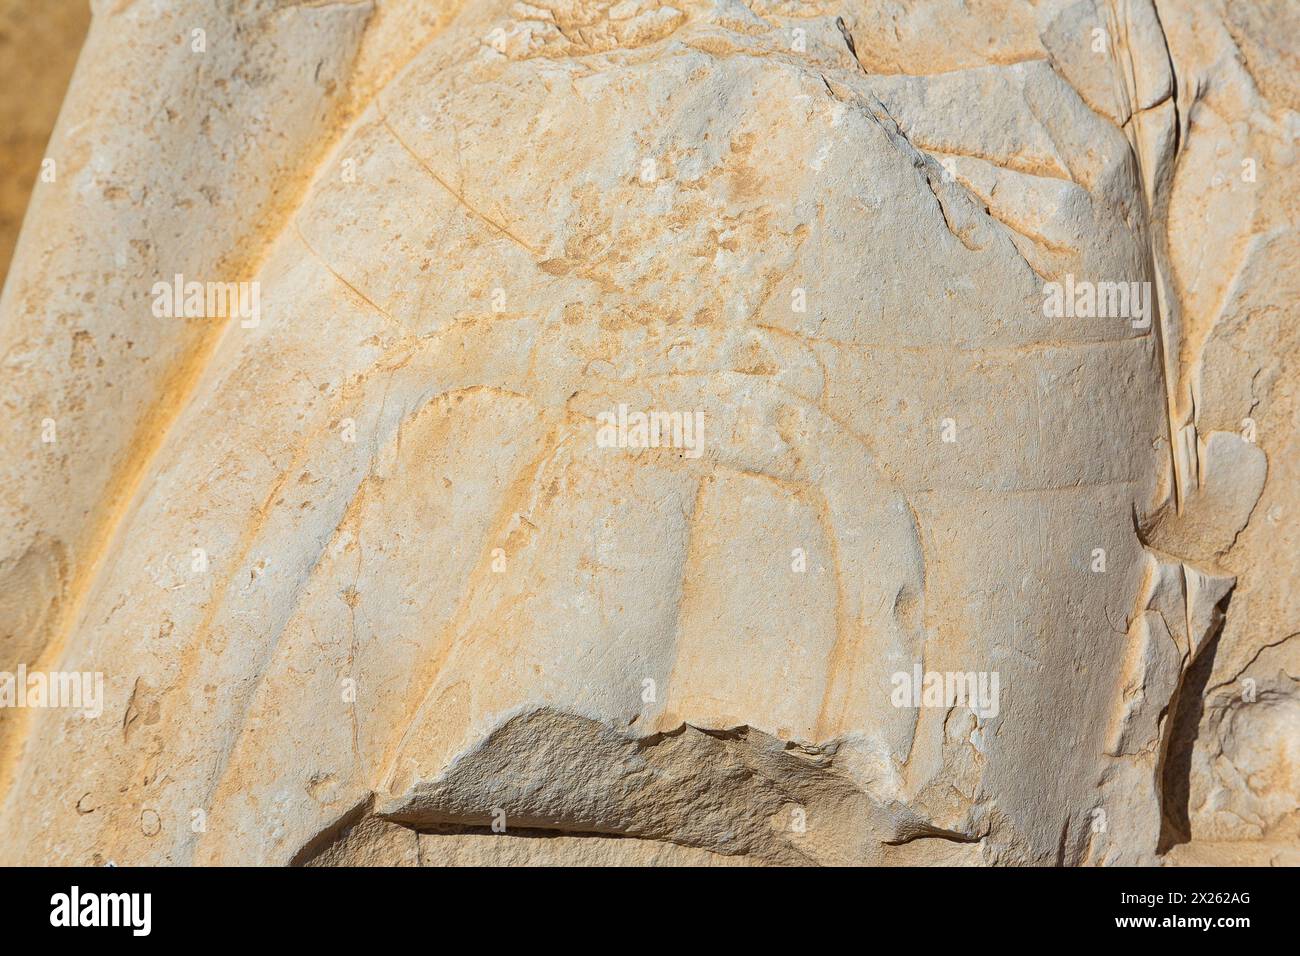 Egypt, Fayum, Hawara, small open air museum near the pyramid of Amenemhat III : Remains of a statue group, loincloth. Stock Photo